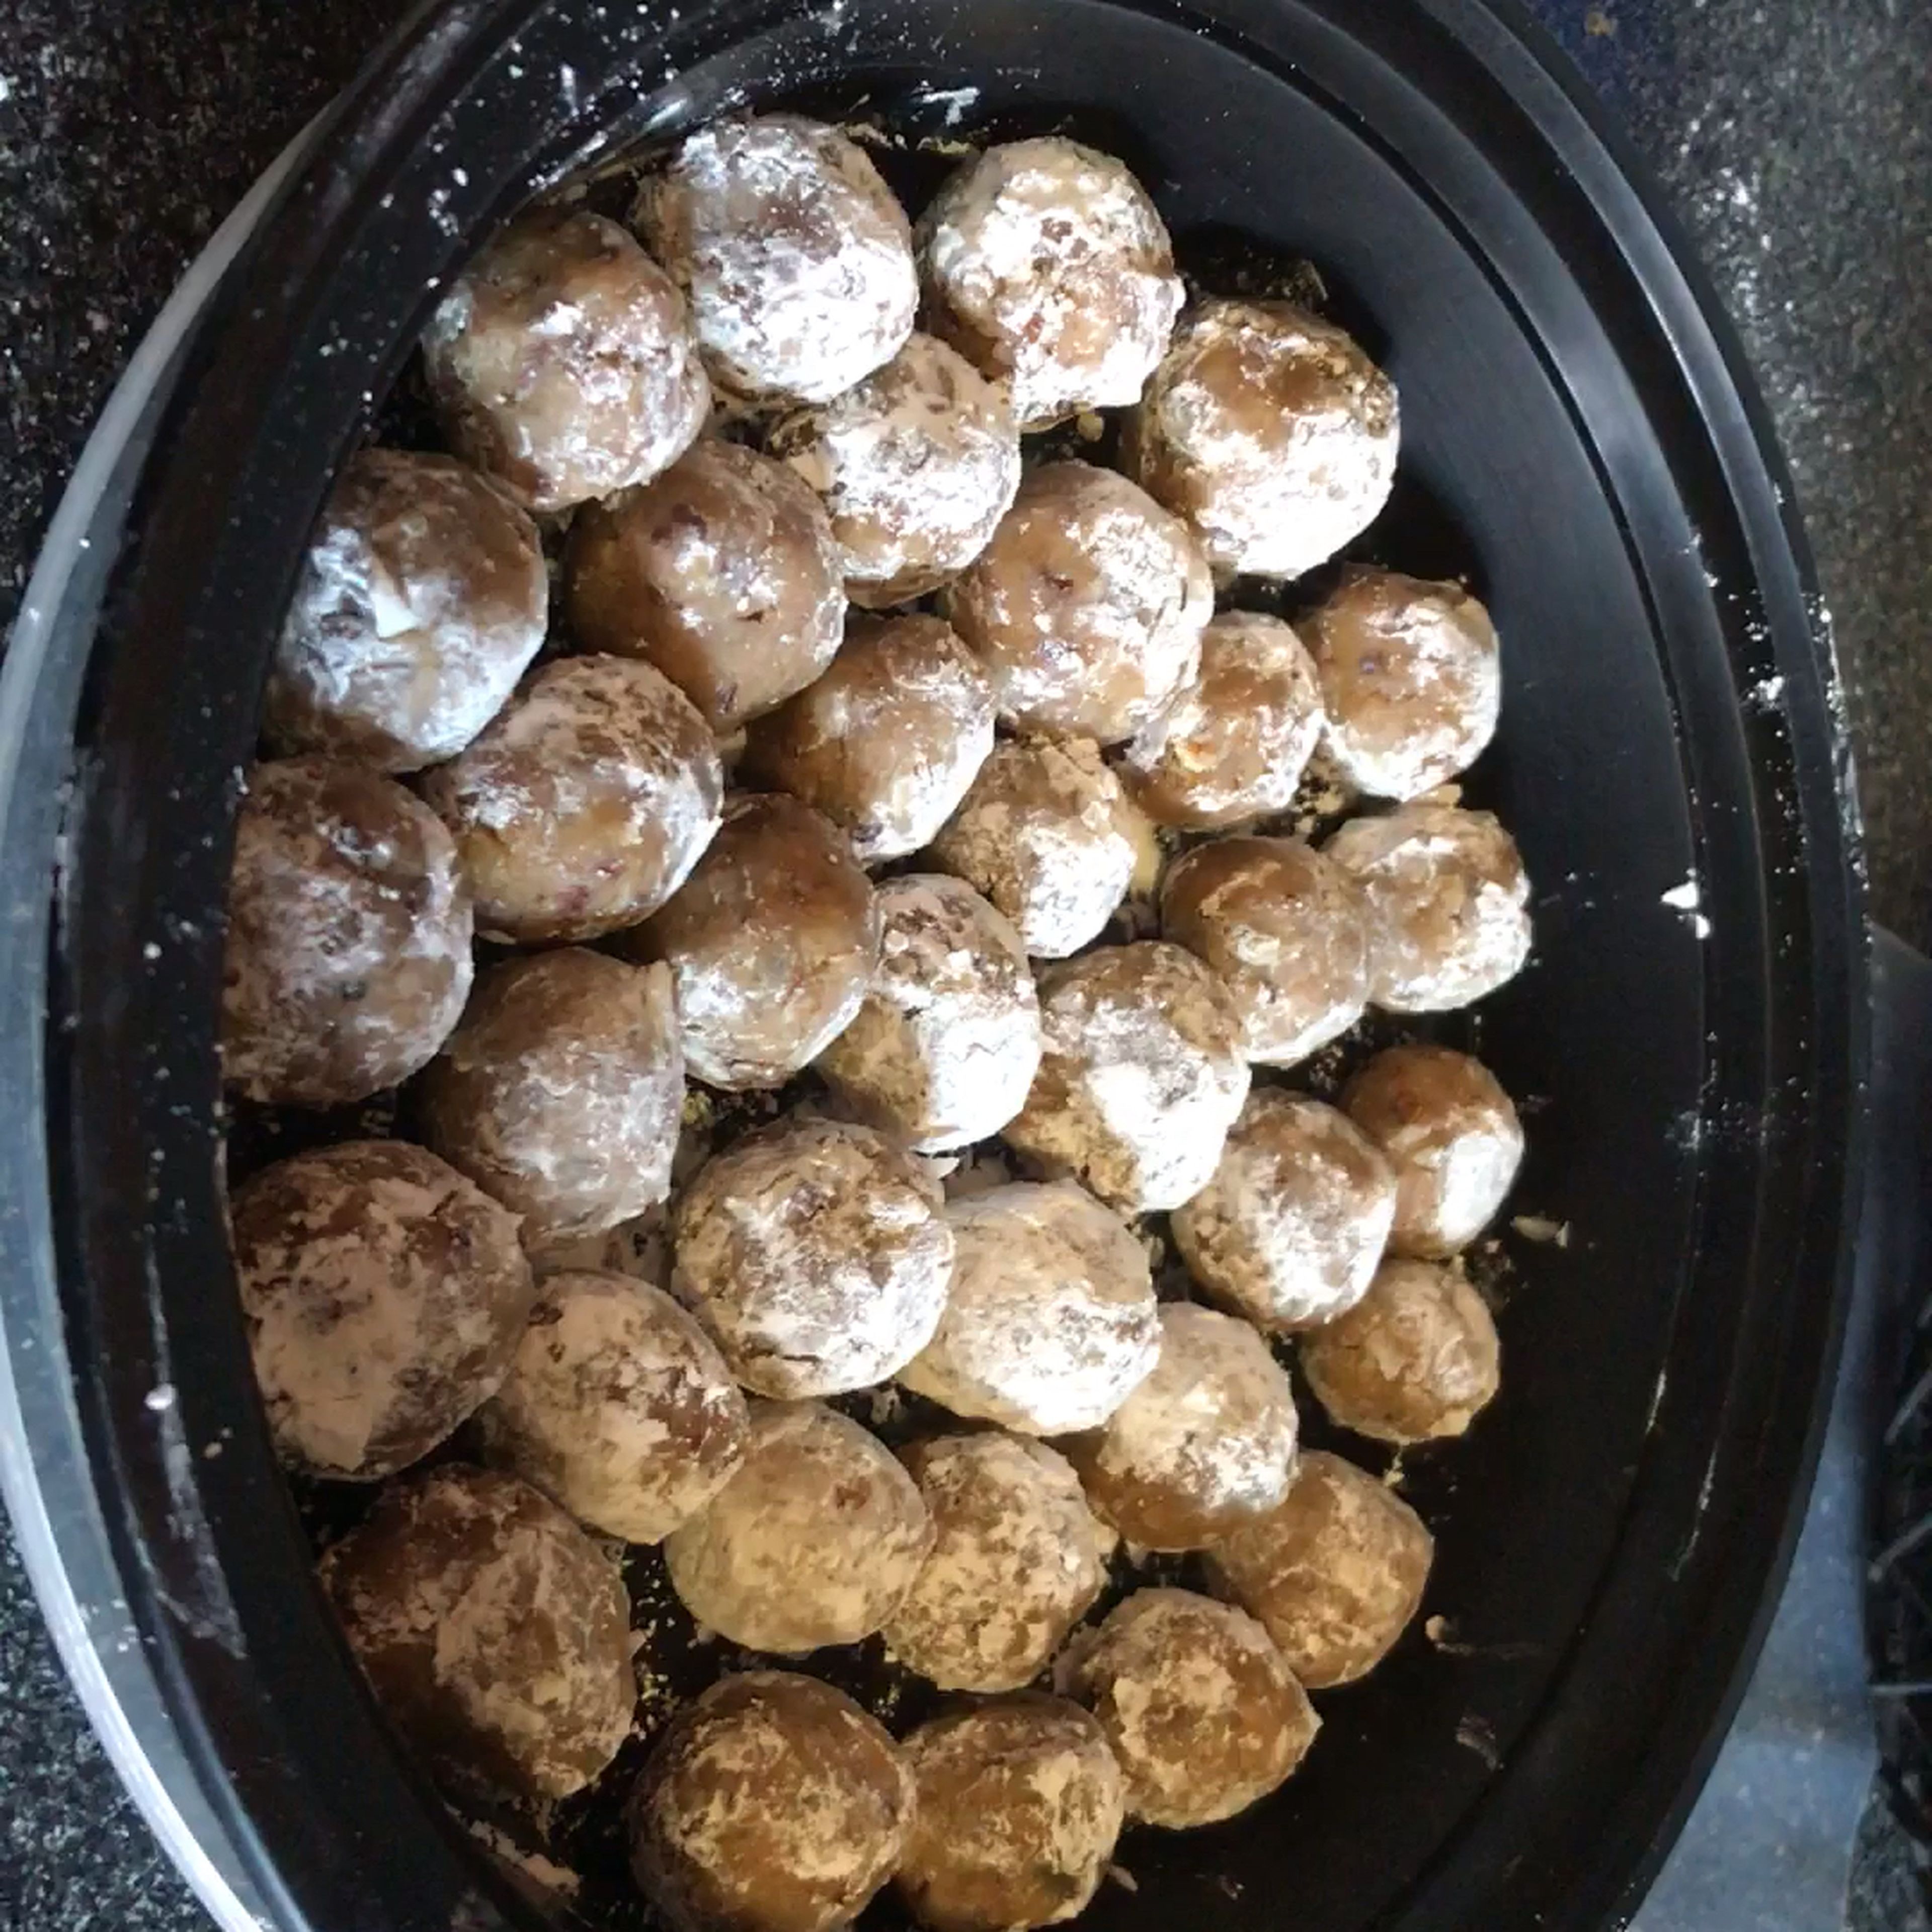 Let rum balls cool in refrigerator for 1hr before serving